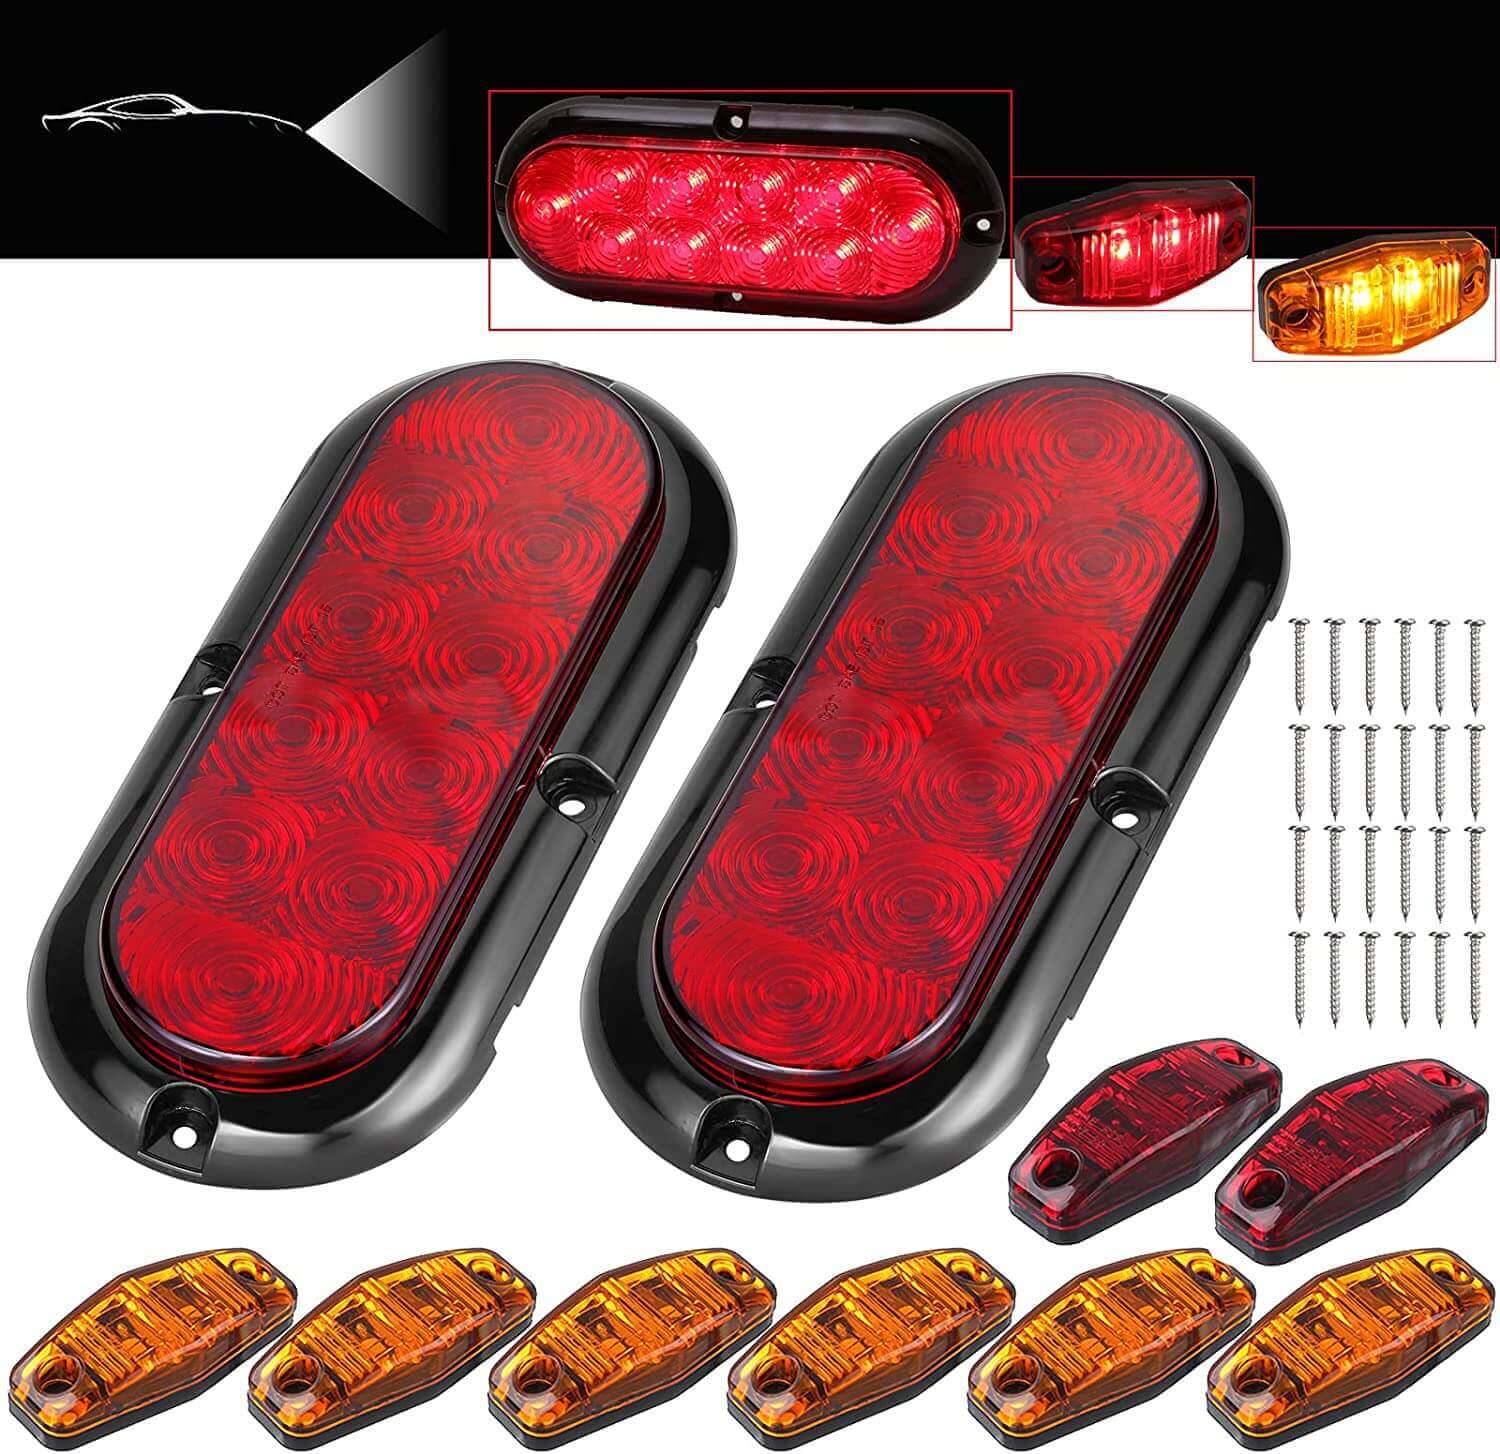 4 Inch Round Red LED Stop/Turn/Tail Lights – LIMICAR LED Trailer